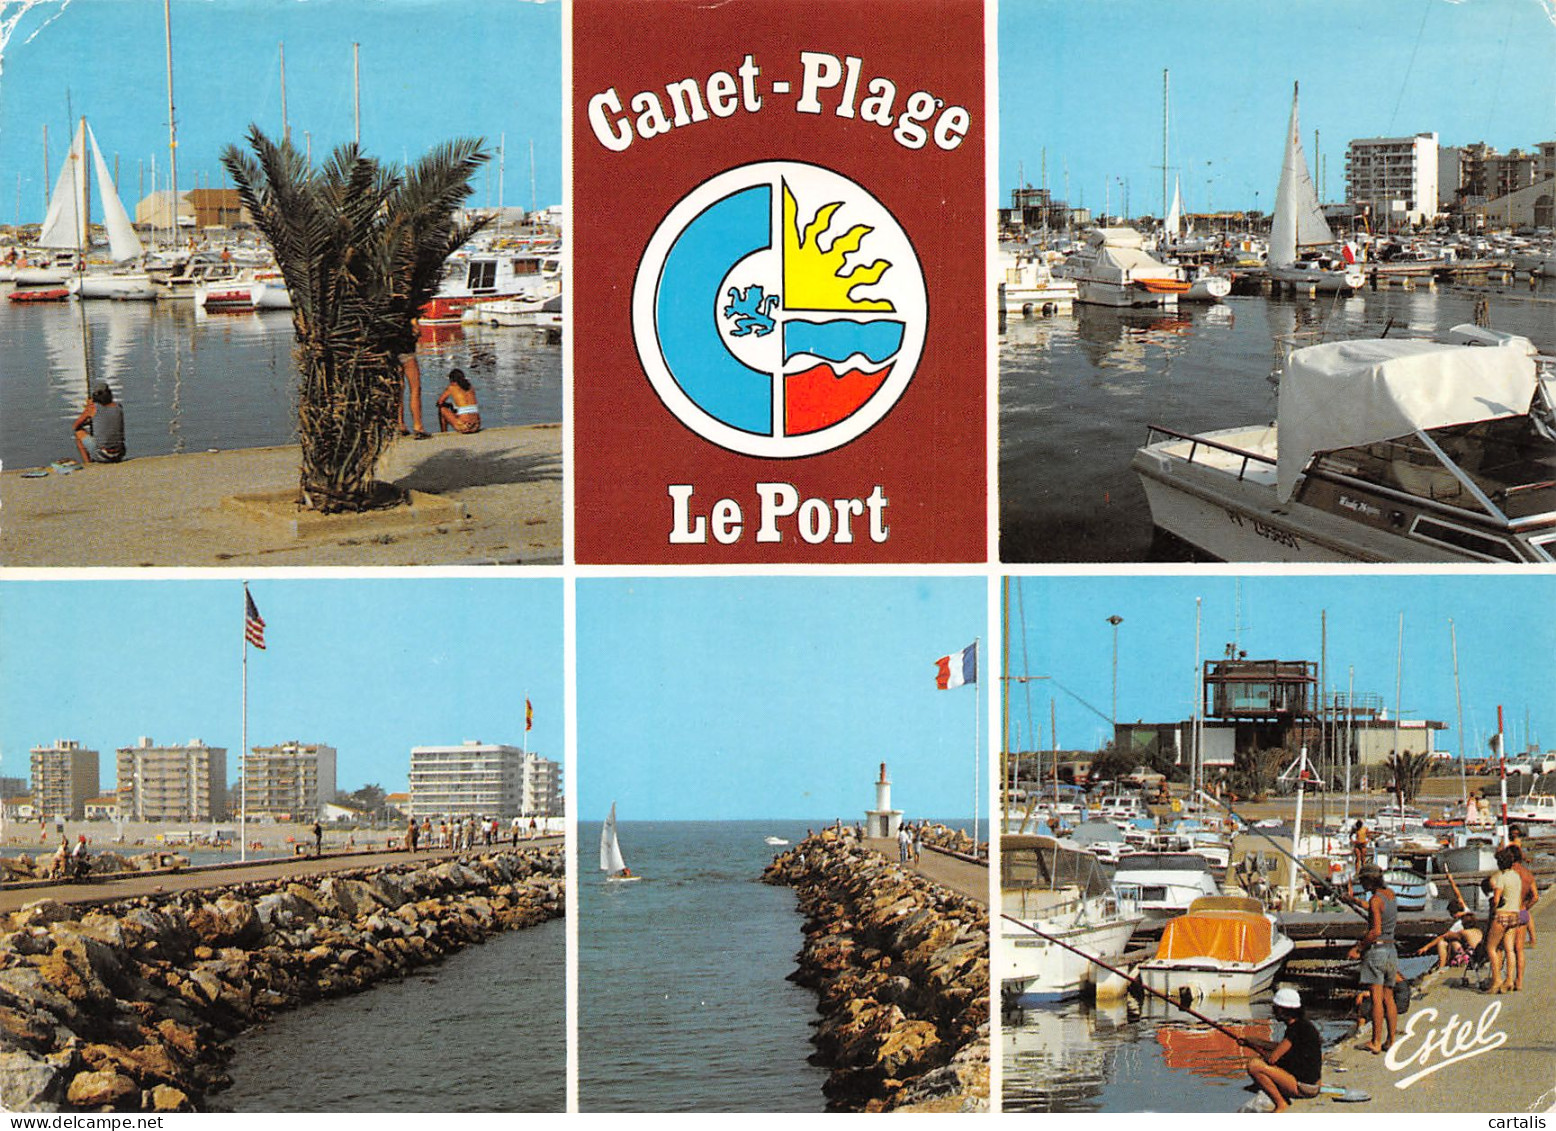 66-CANET PLAGE-N°3805-C/0183 - Canet Plage